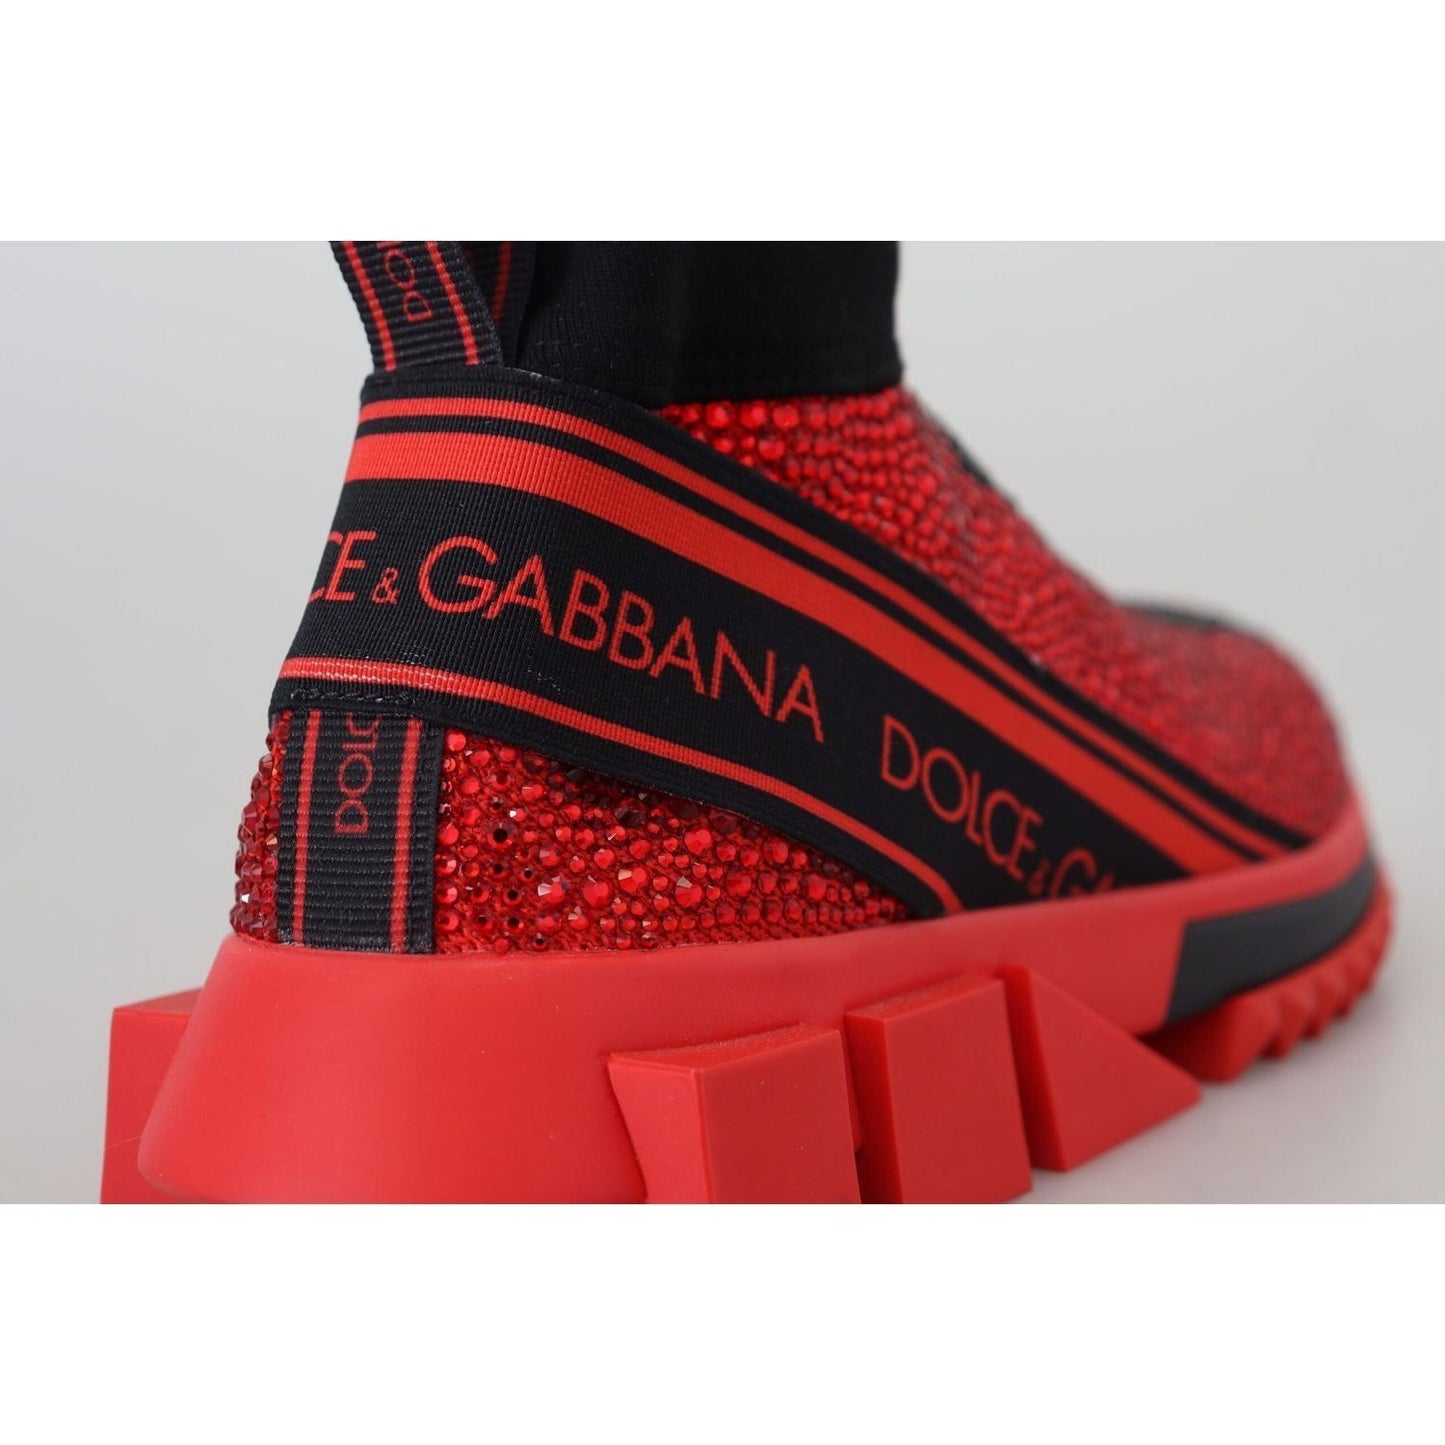 Dolce & Gabbana Exquisite Red Sorrento Slip-On Sneakers red-bling-sorrento-sneakers-socks-shoes